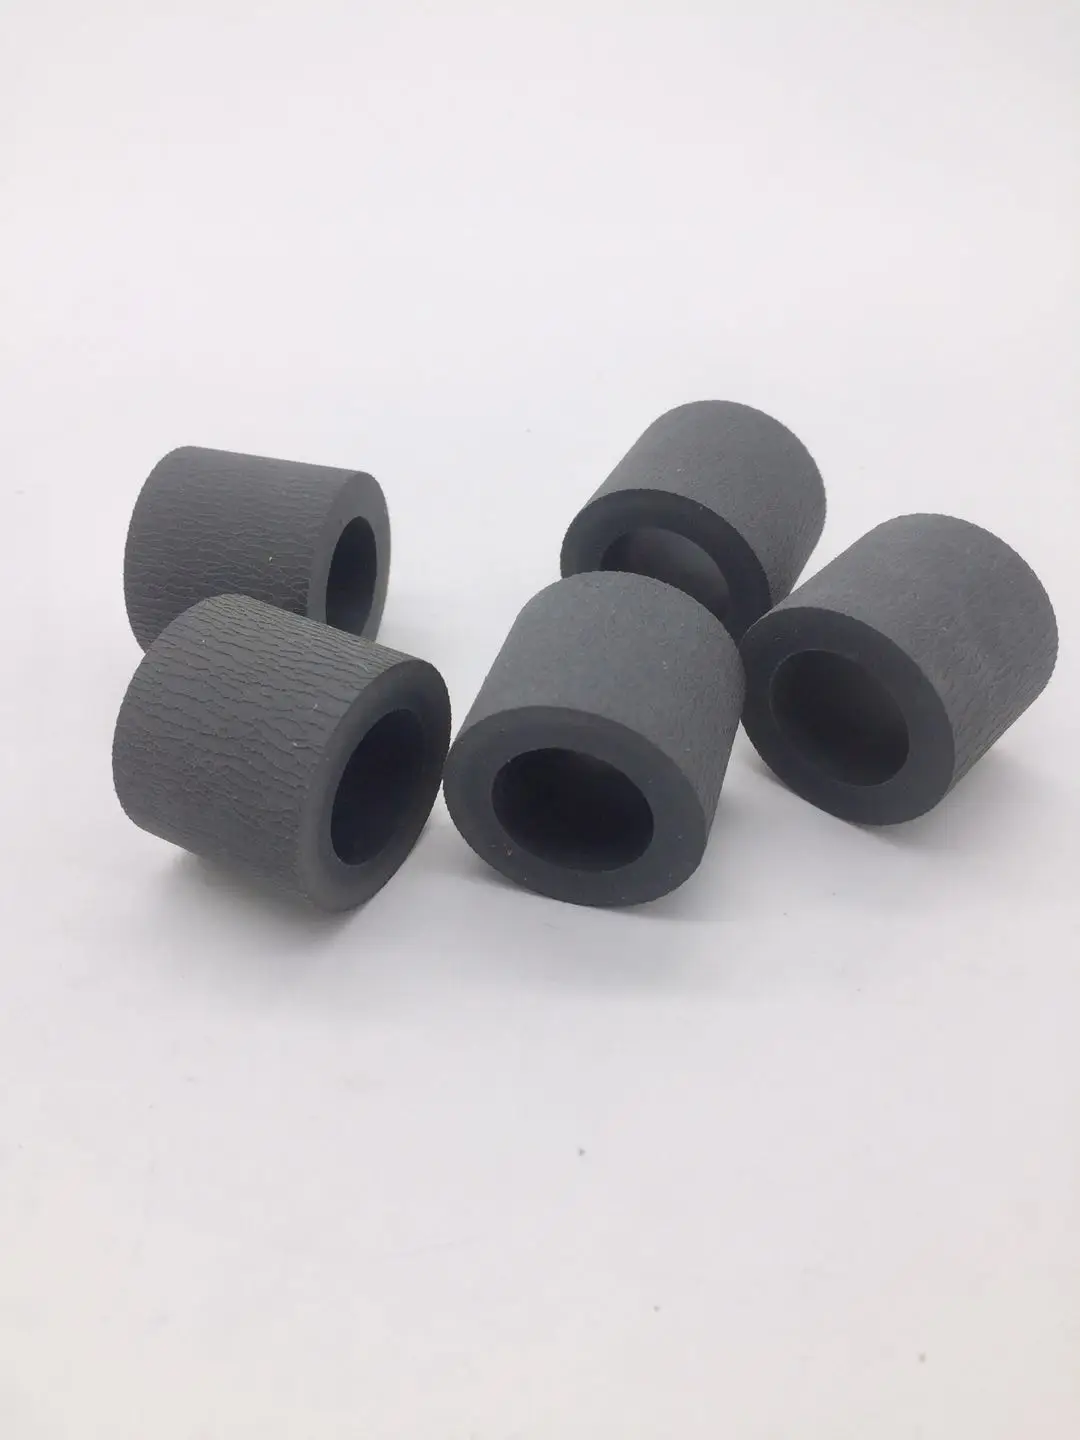 

0434B002 MG1-3457-000 MA2-6772-000 MG1-3684-000 Exchange Roller Kit Pickup Feed Retard Roller for Canon DR-5010C DR-6030C 5010C